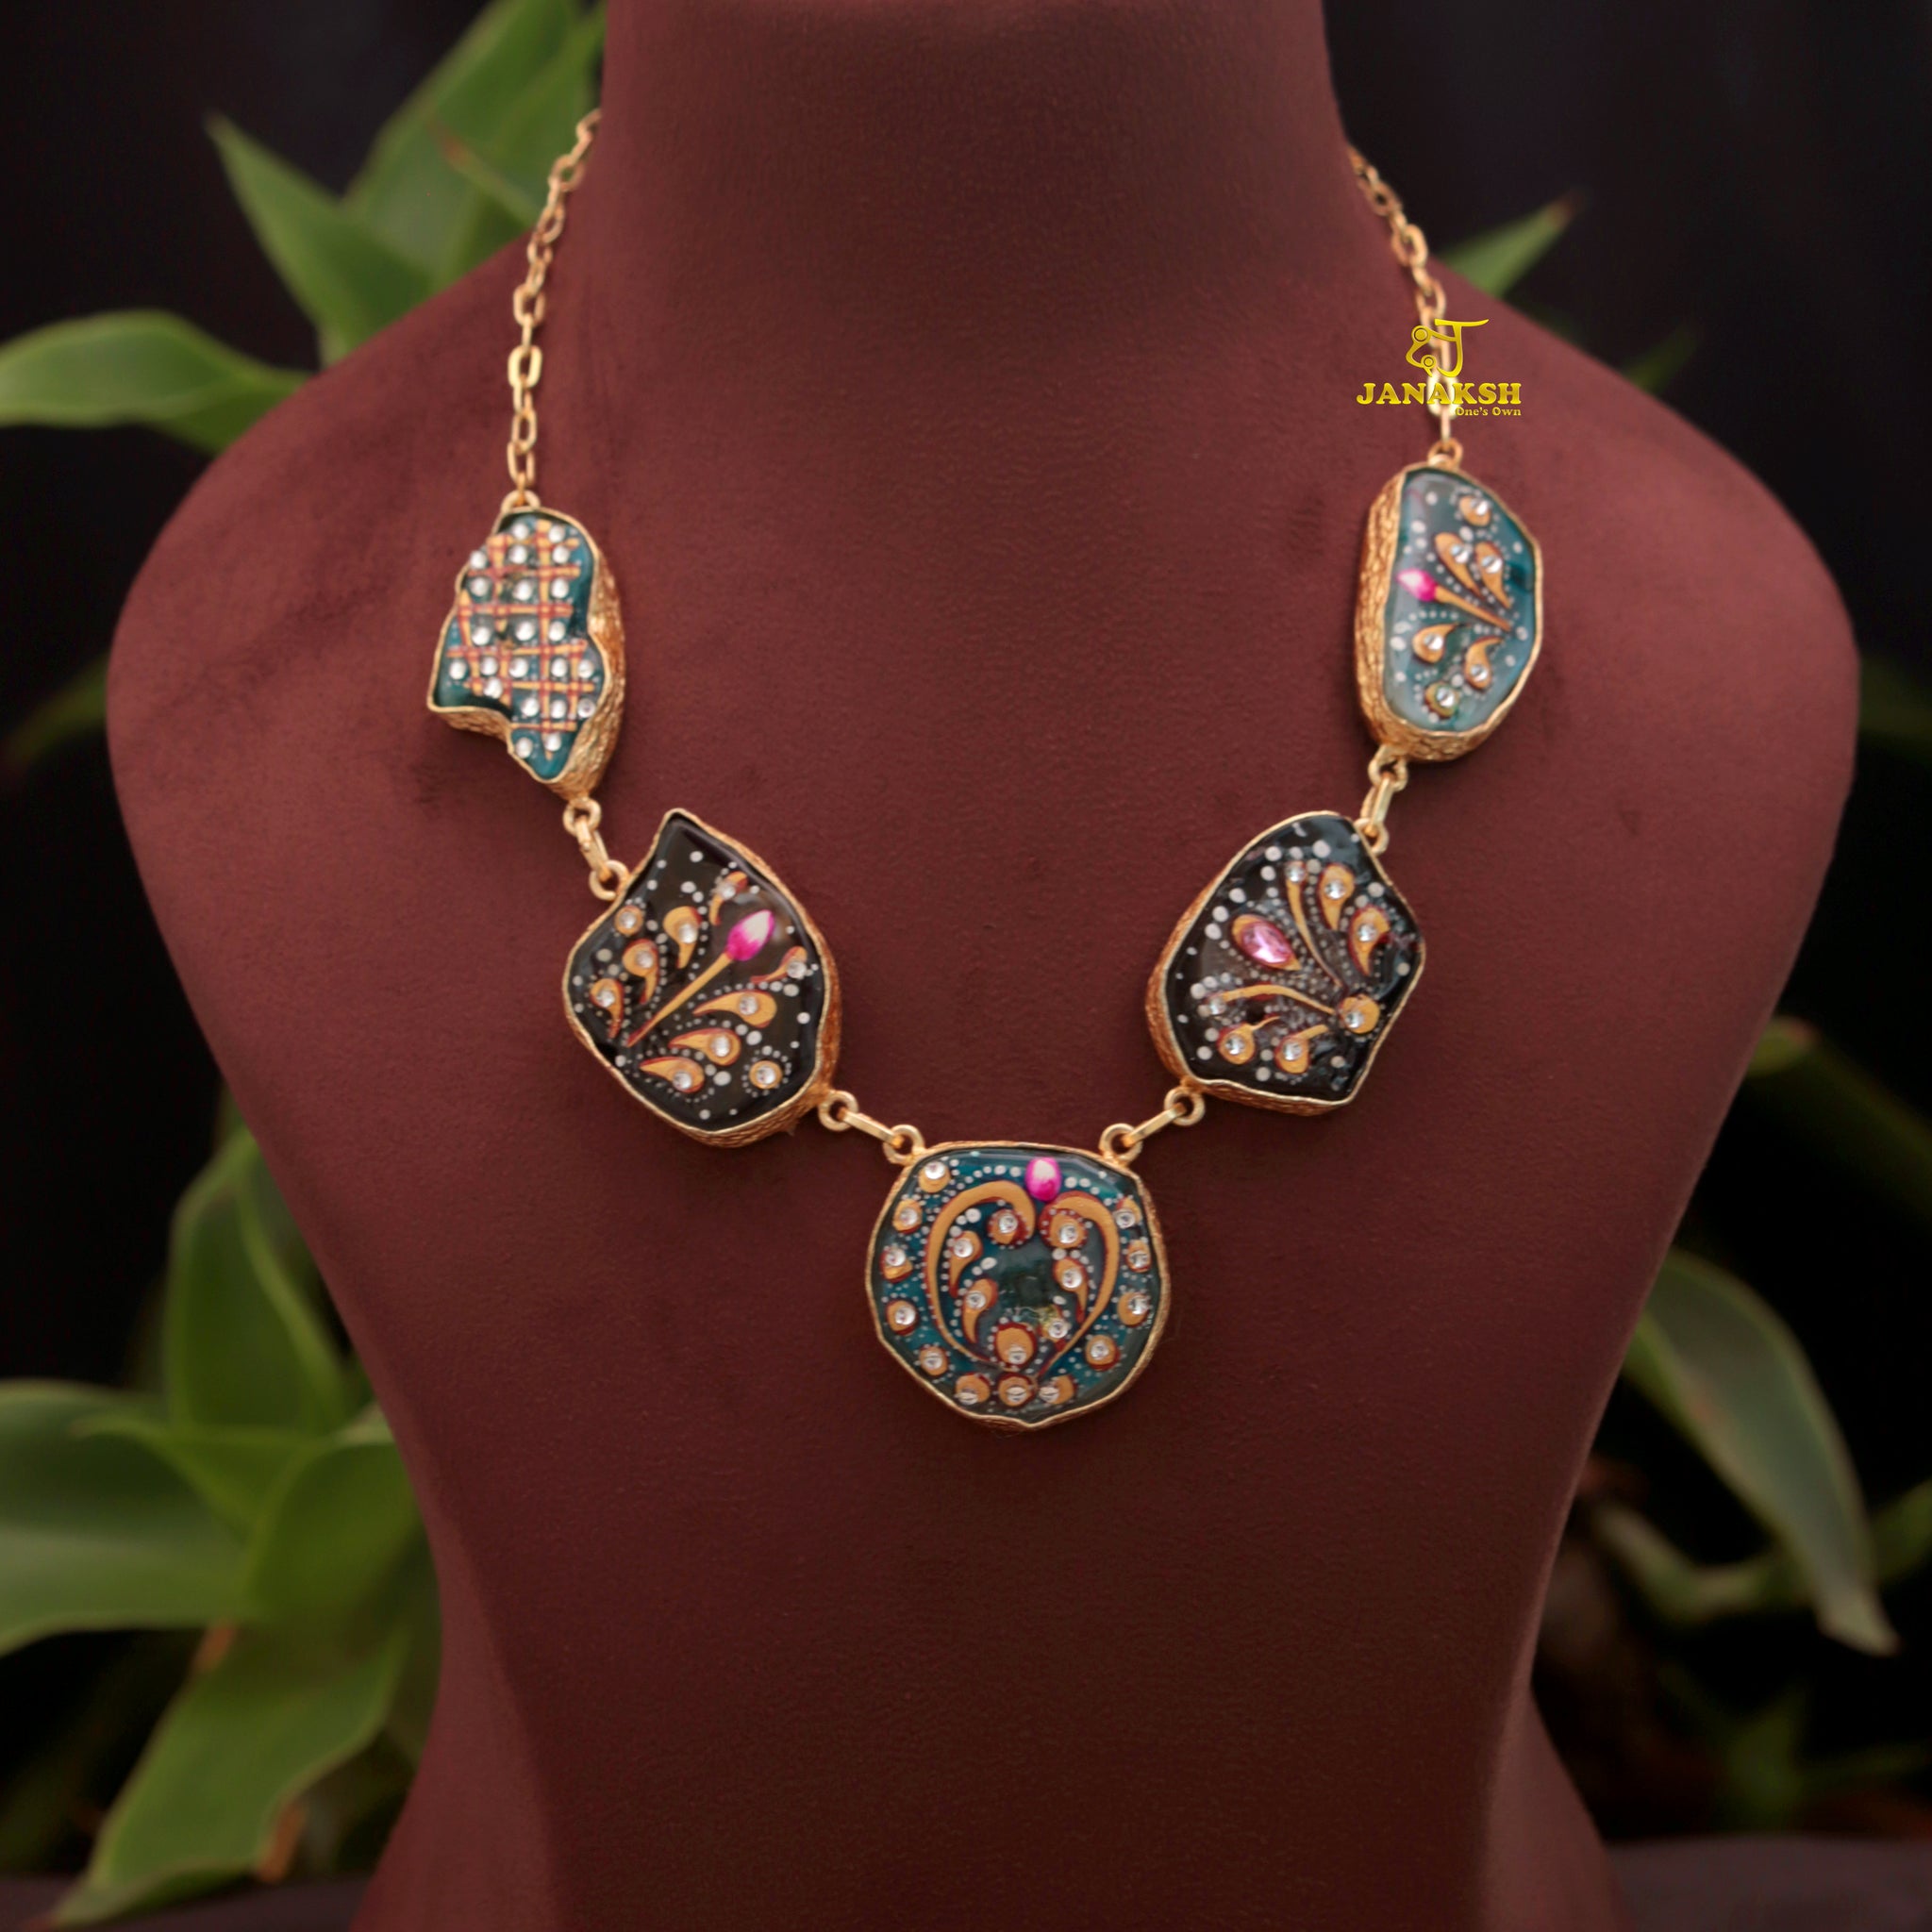 Janaksh Handcrafted Semiprecious Druzy Stone Gold Plated Statement tanjore Necklace